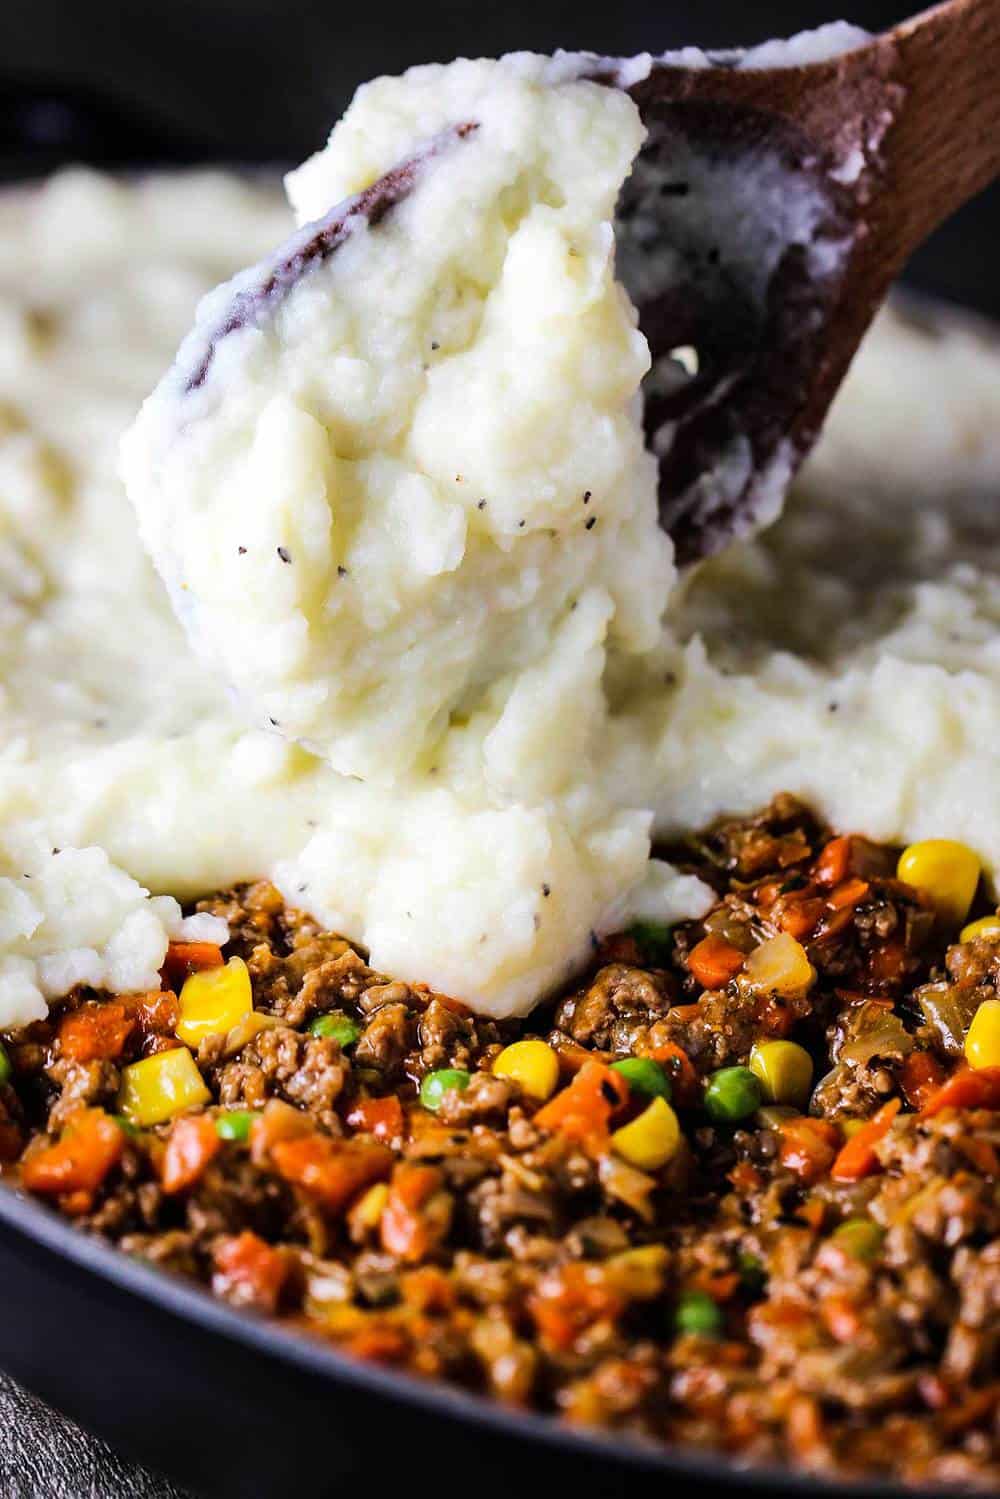 A wooden spoon adding a layer of whipped potatoes over meat filling for shepherd's pie